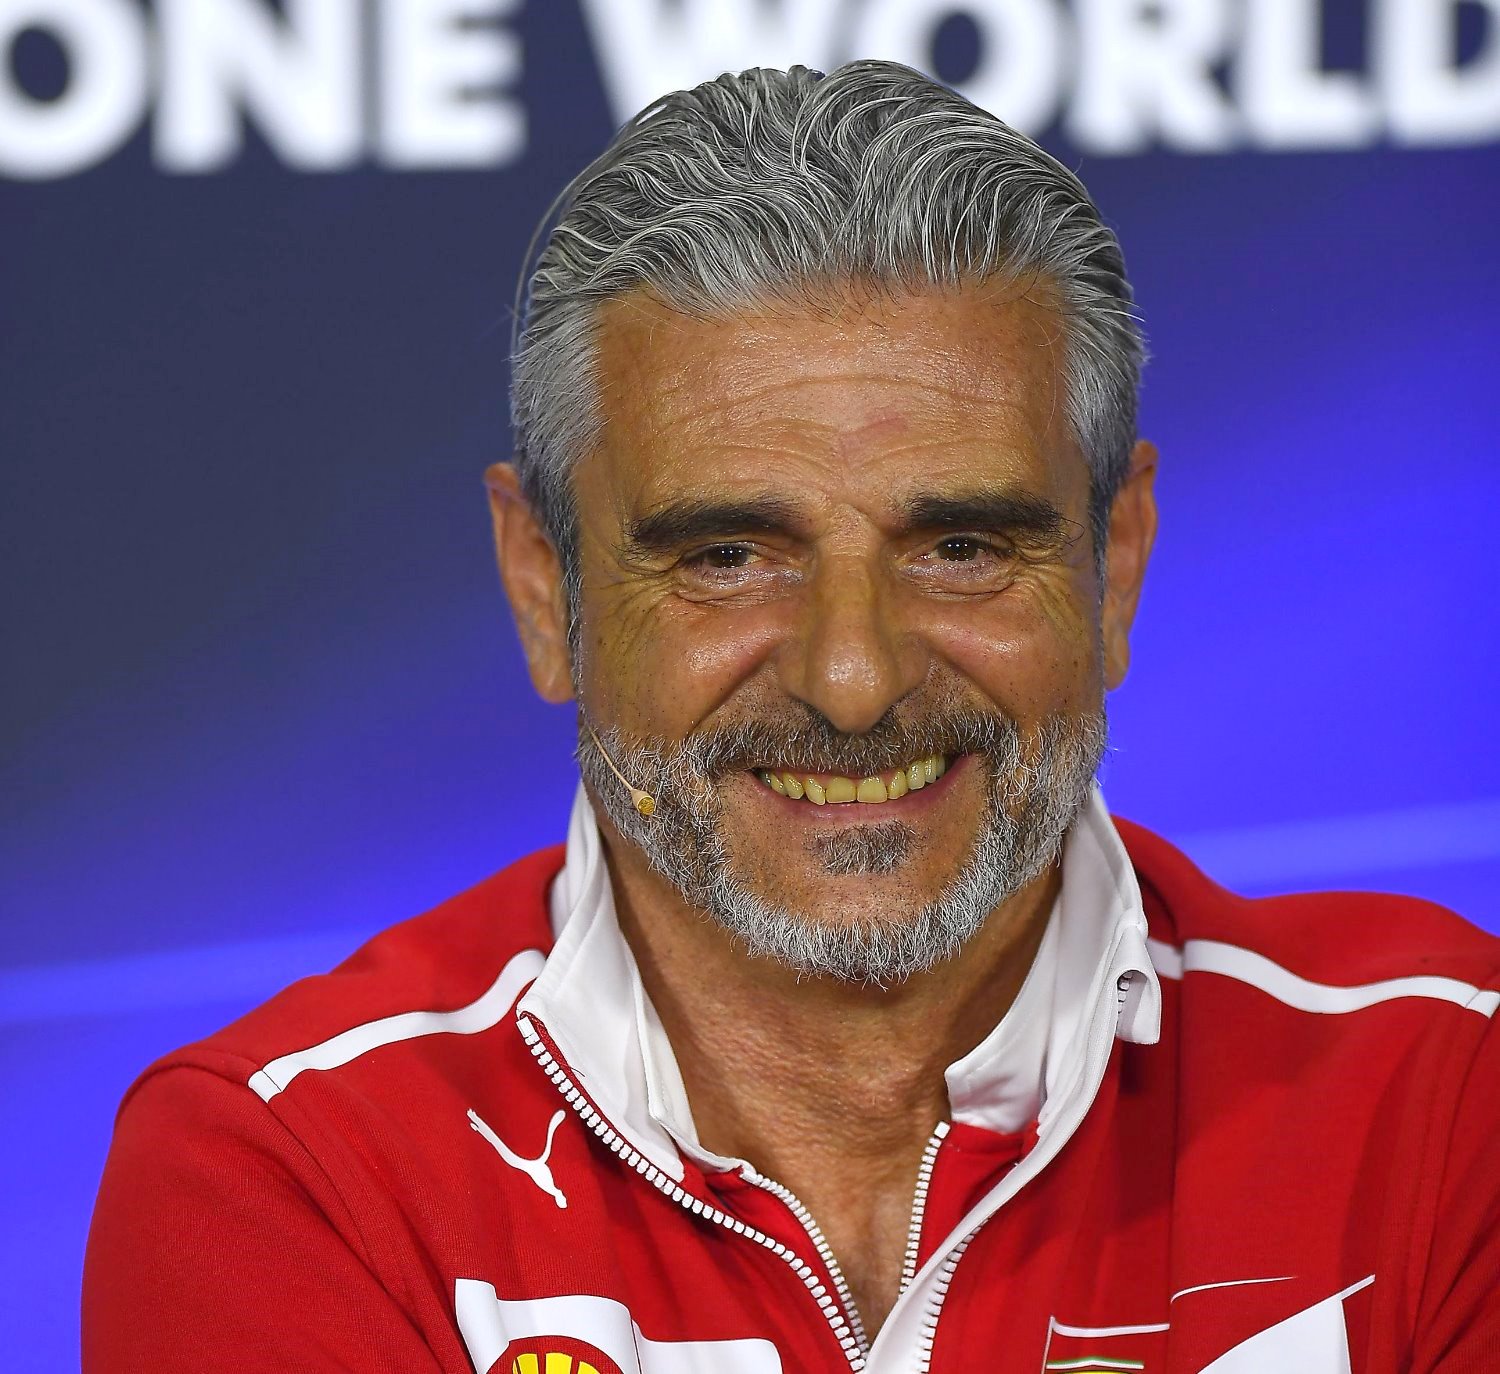 Maurizio Arrivabene wasn't smiling after the race